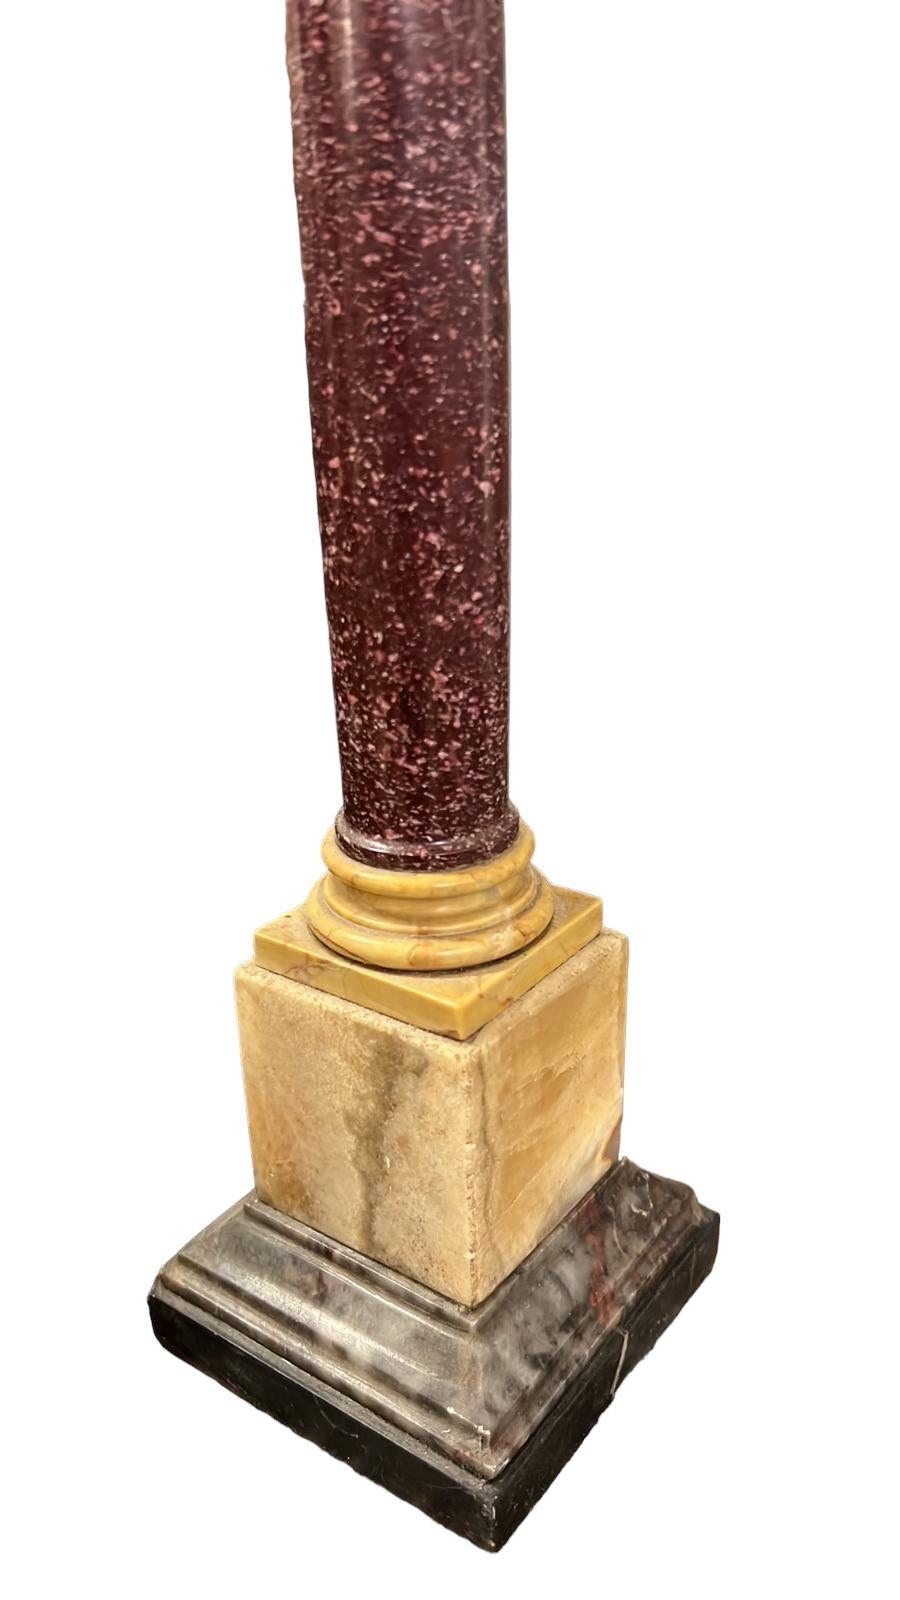 The grand tour porphyry columns with yellow marble Corinthian capitals and bases on black slate and gray Brescia ogee formed squares.
Measures: height: 16” base: 3 1/4” square.